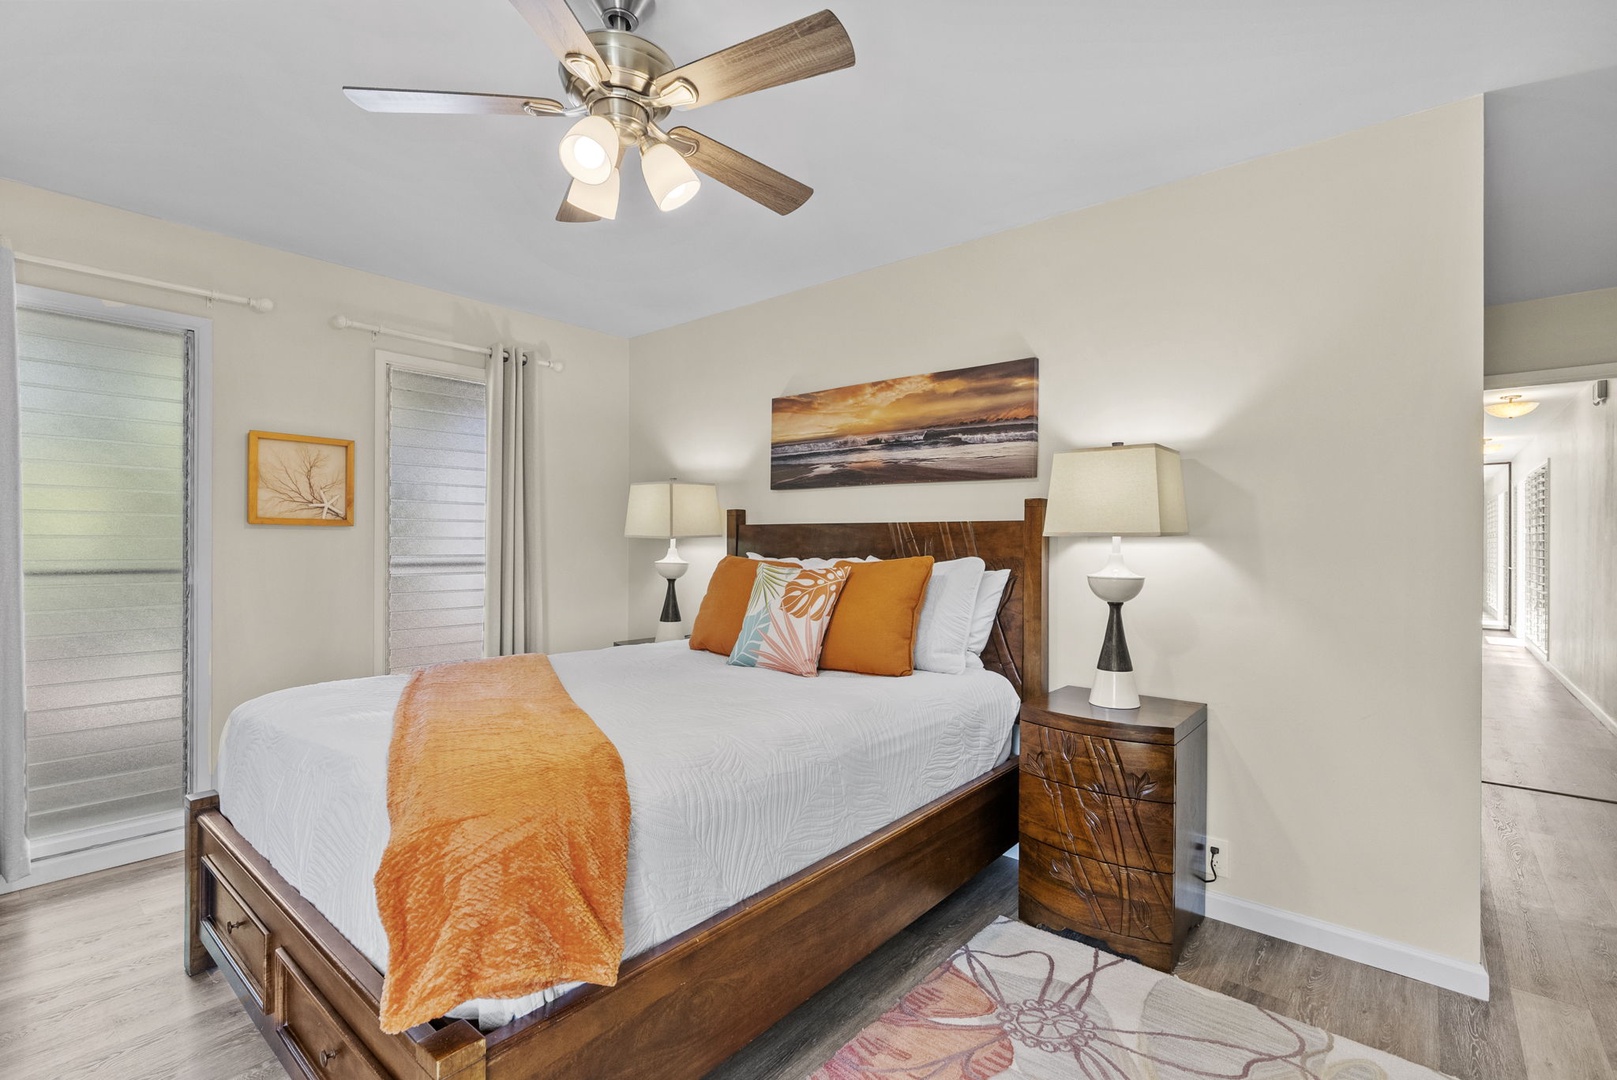 Kailua Vacation Rentals, Hale Aloha - Adorned with a plush queen bed clothed in fine linens.